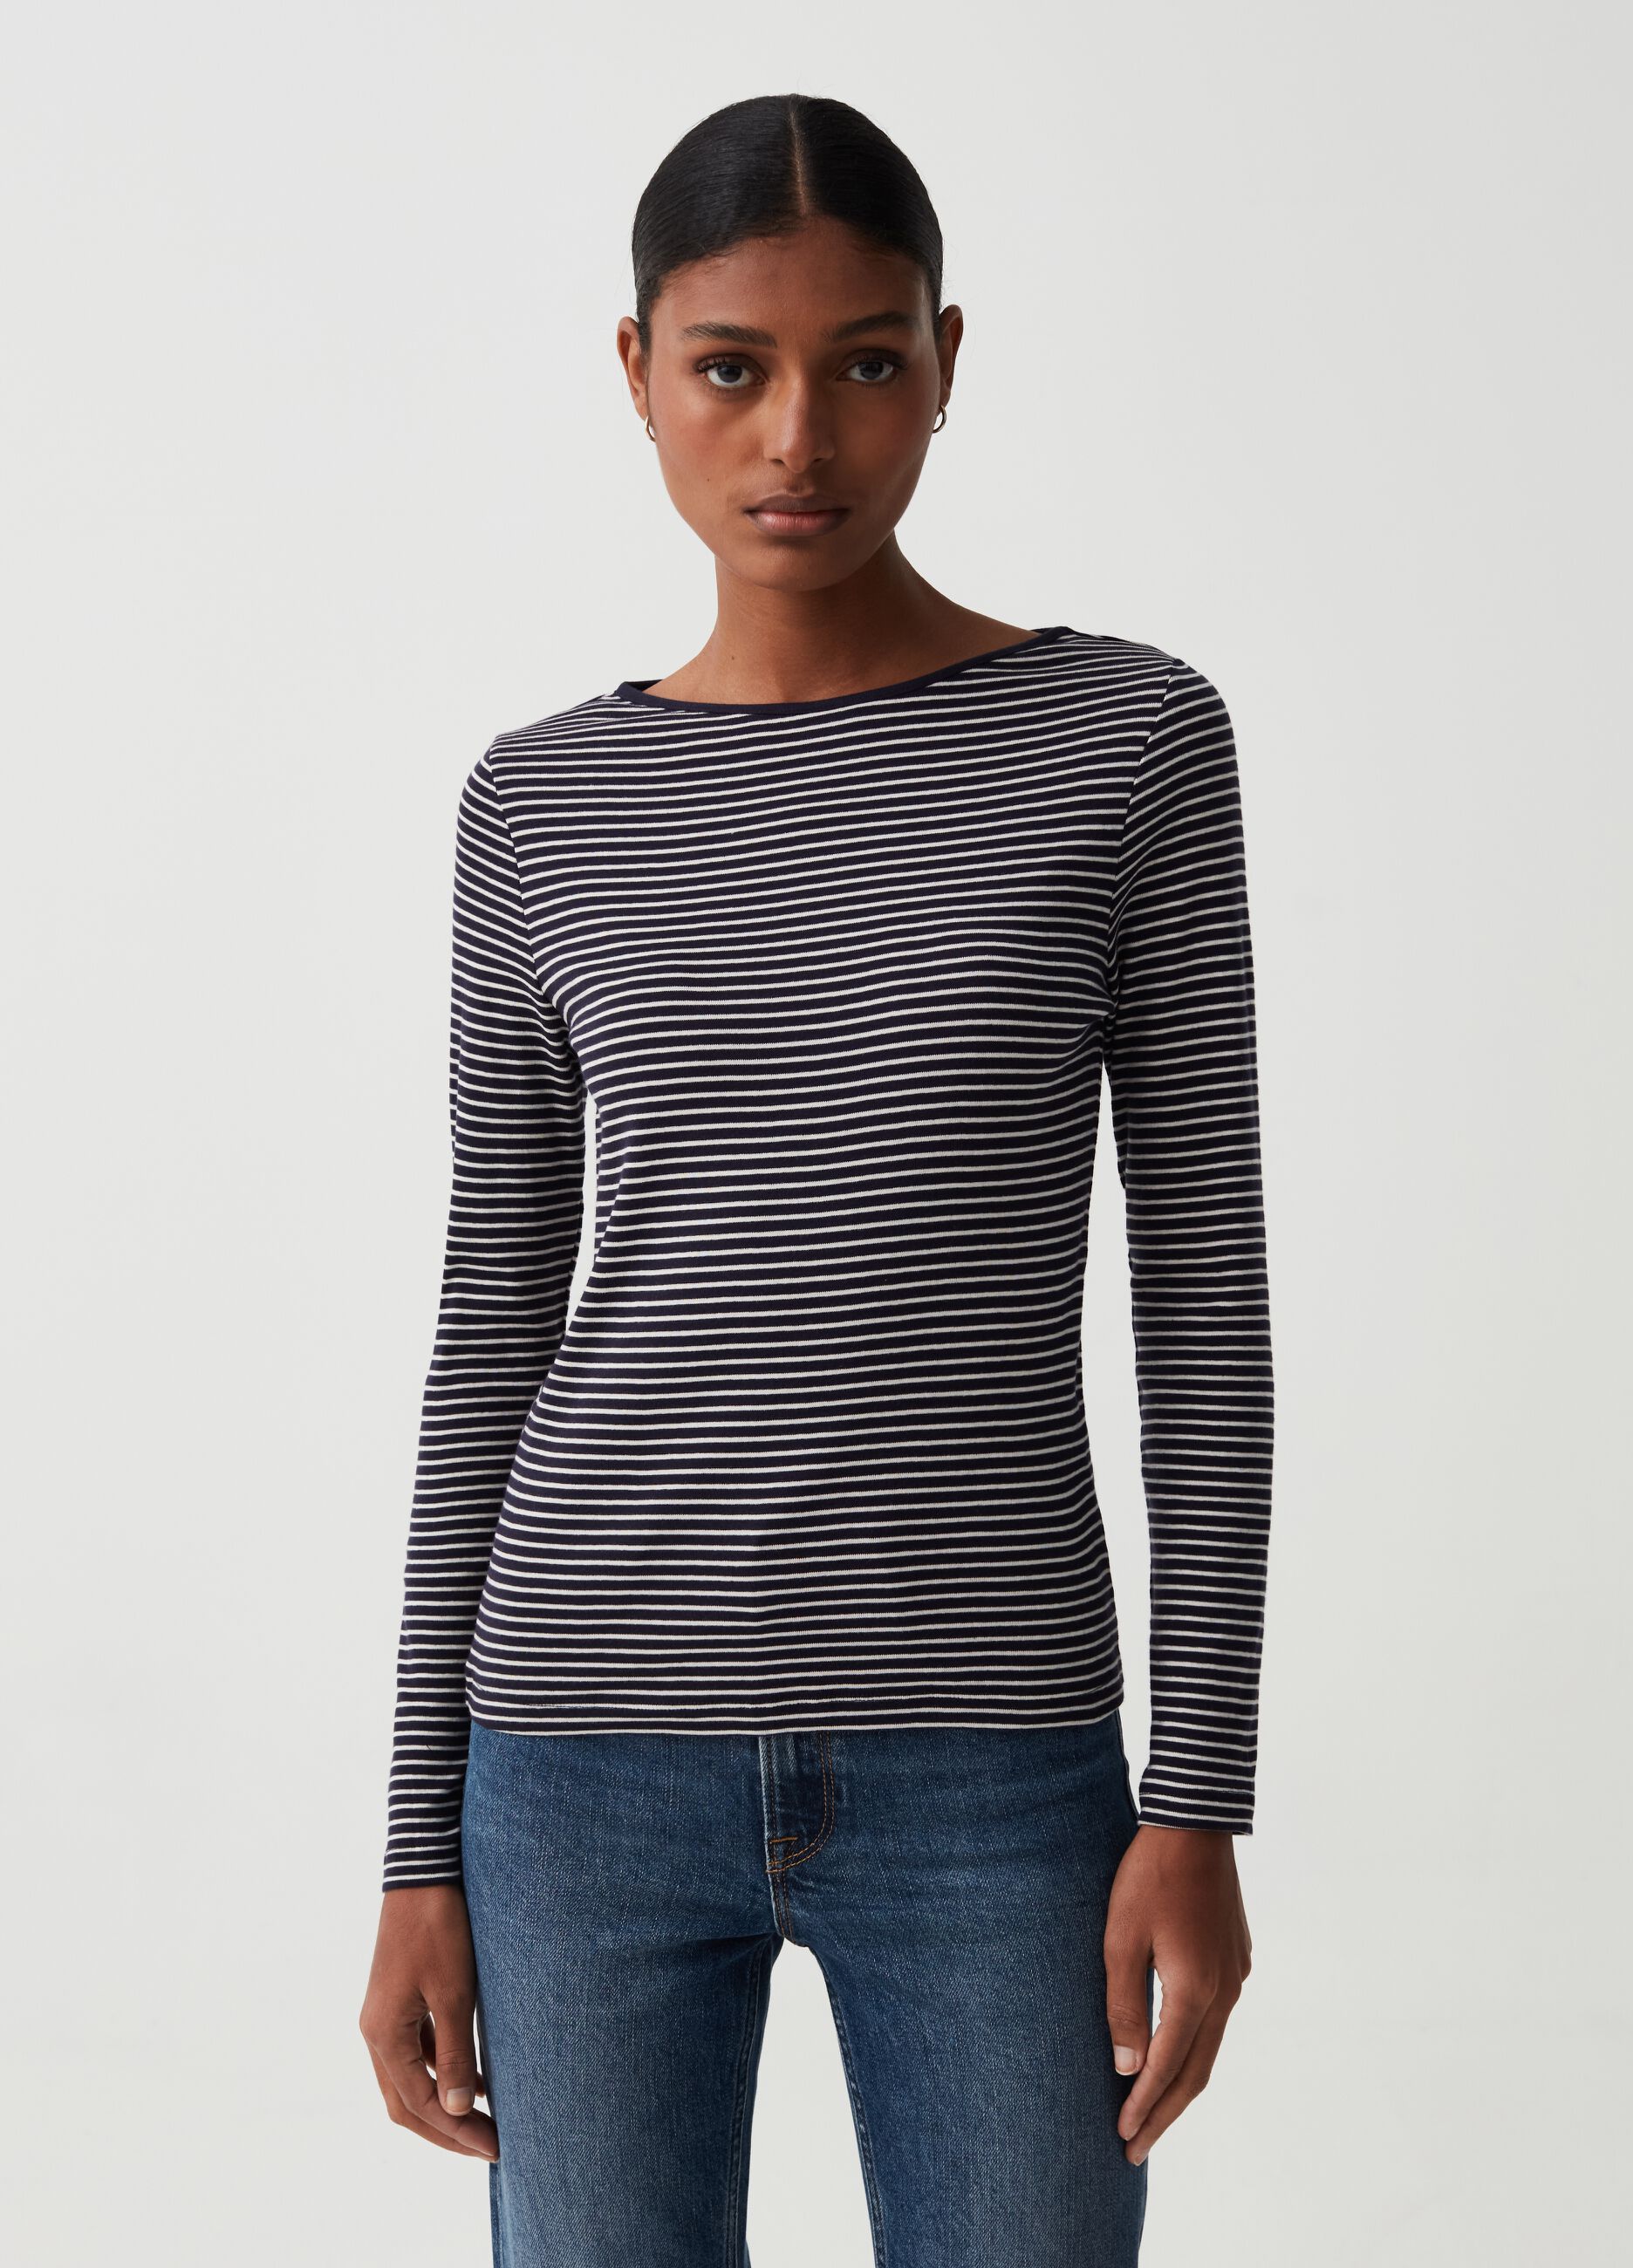 Slim striped T-shirt with boat neck